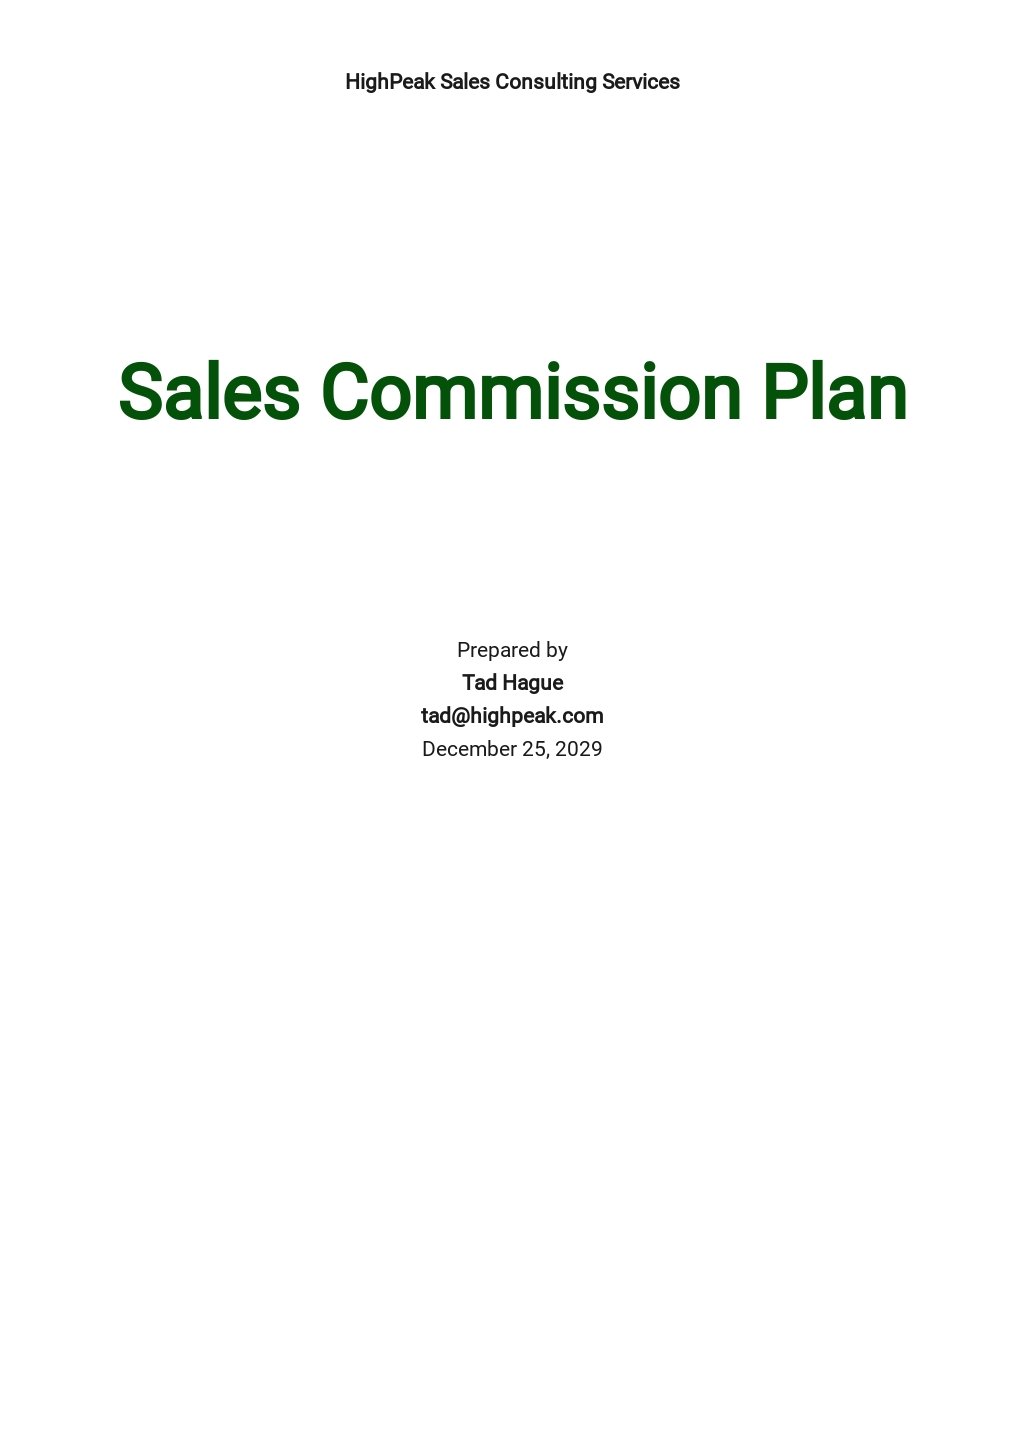 Sales Commission Plan Template in Google Docs, Word, Apple Pages